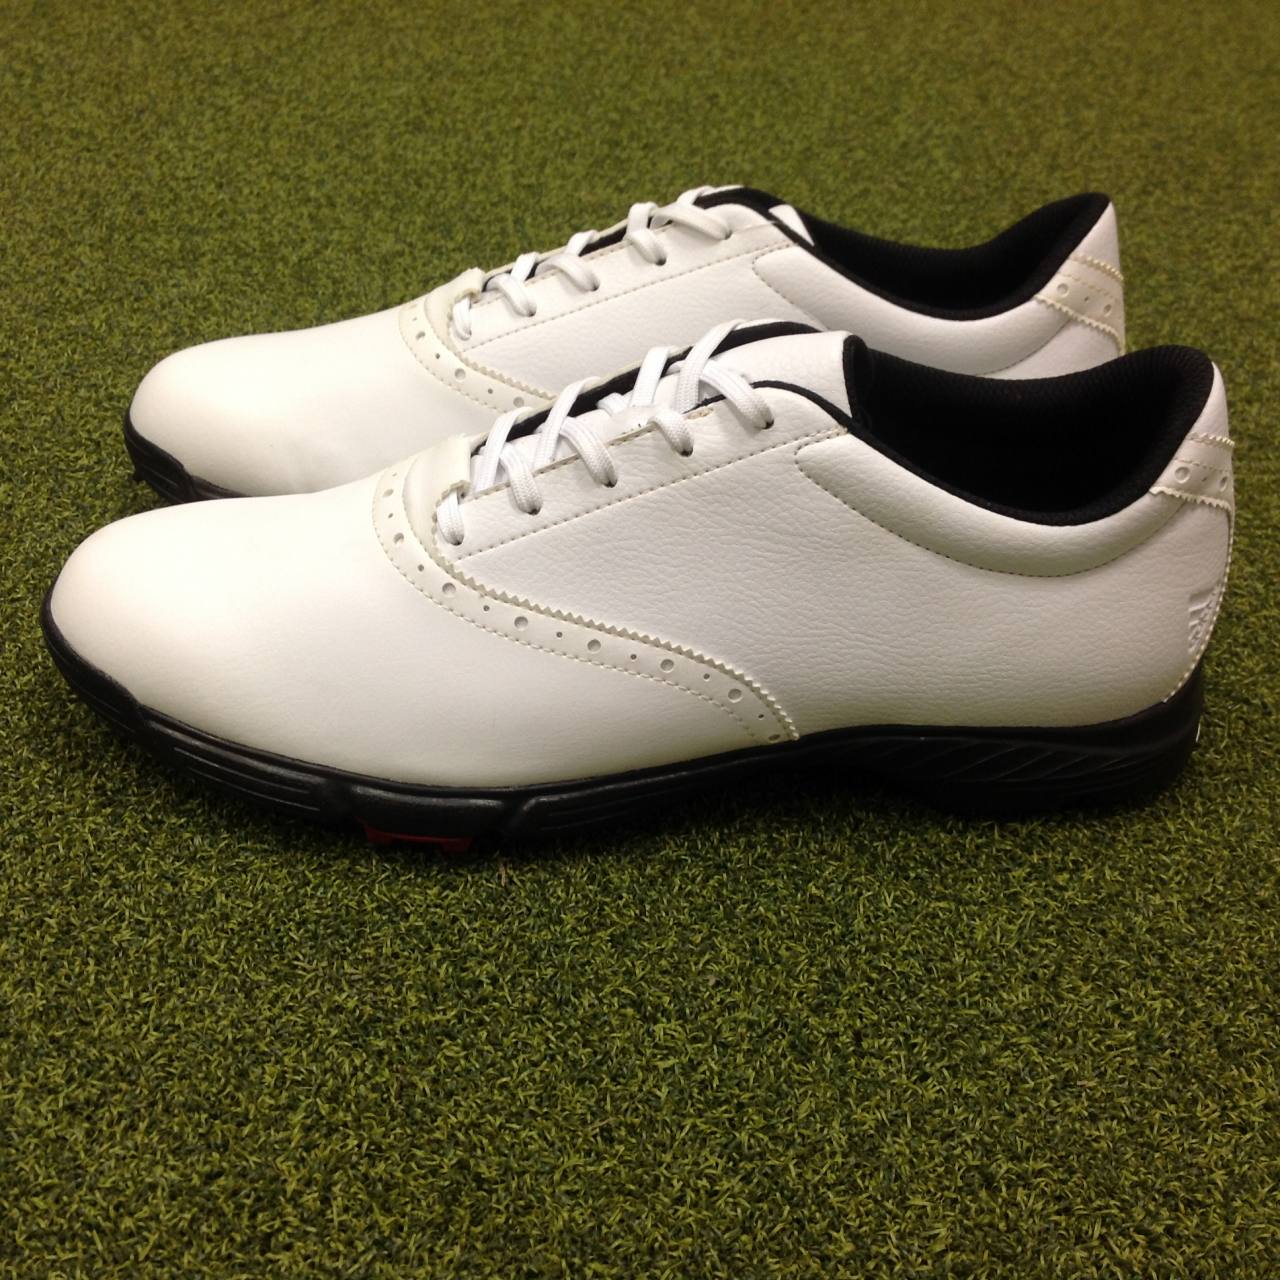 NEW Adidas Golflite 5Z Golf Shoes – UK 